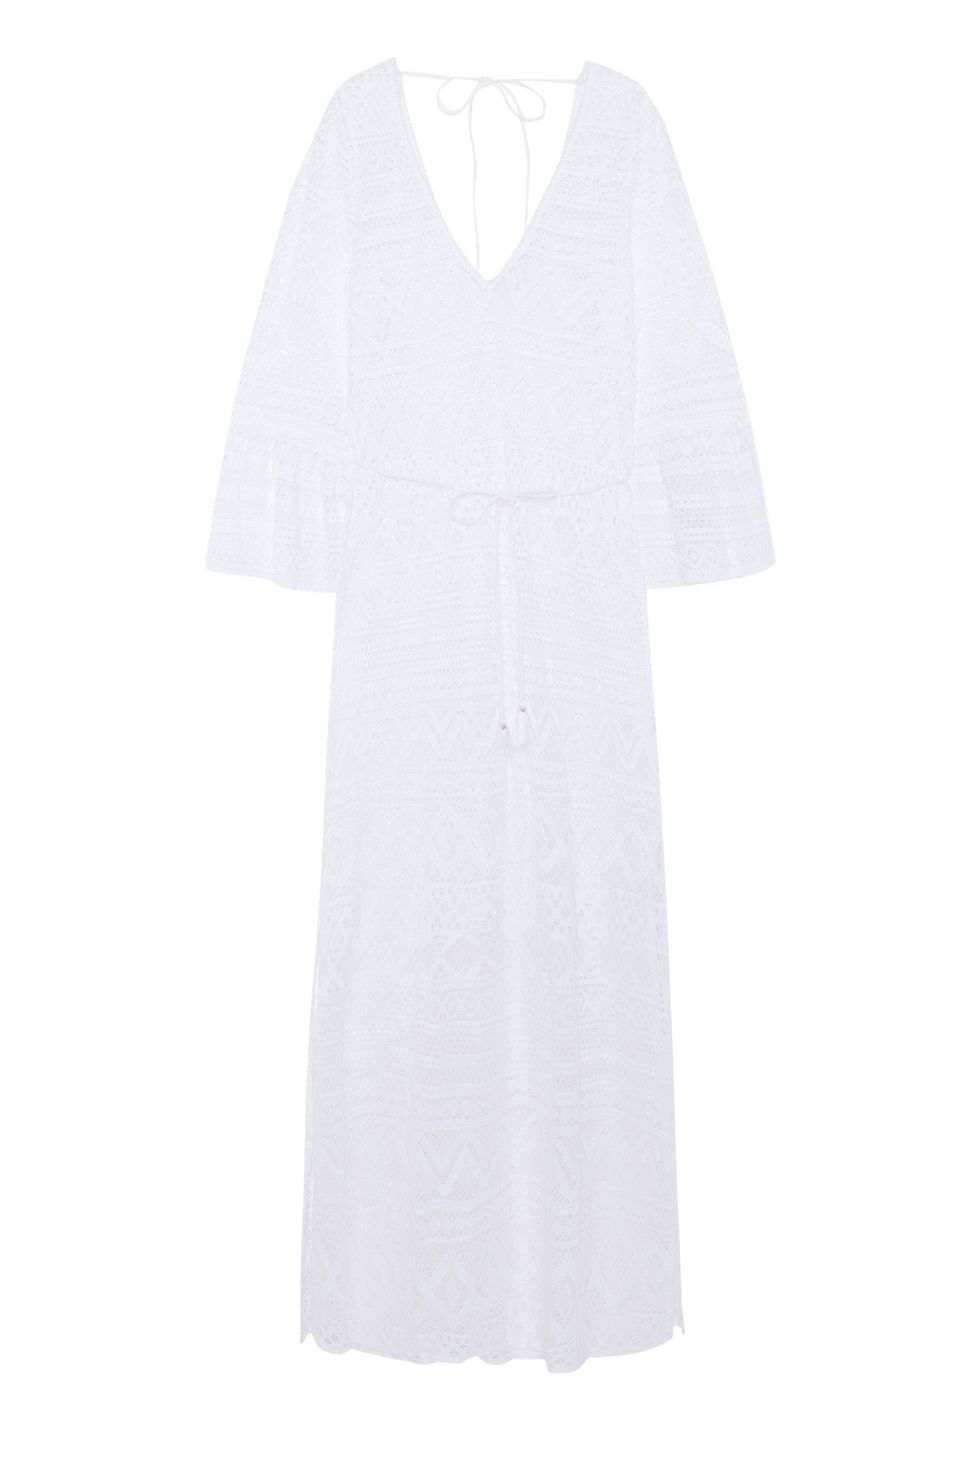 White, Clothing, Robe, Dress, Sleeve, Outerwear, Neck, Gown, Day dress, Nightwear, 